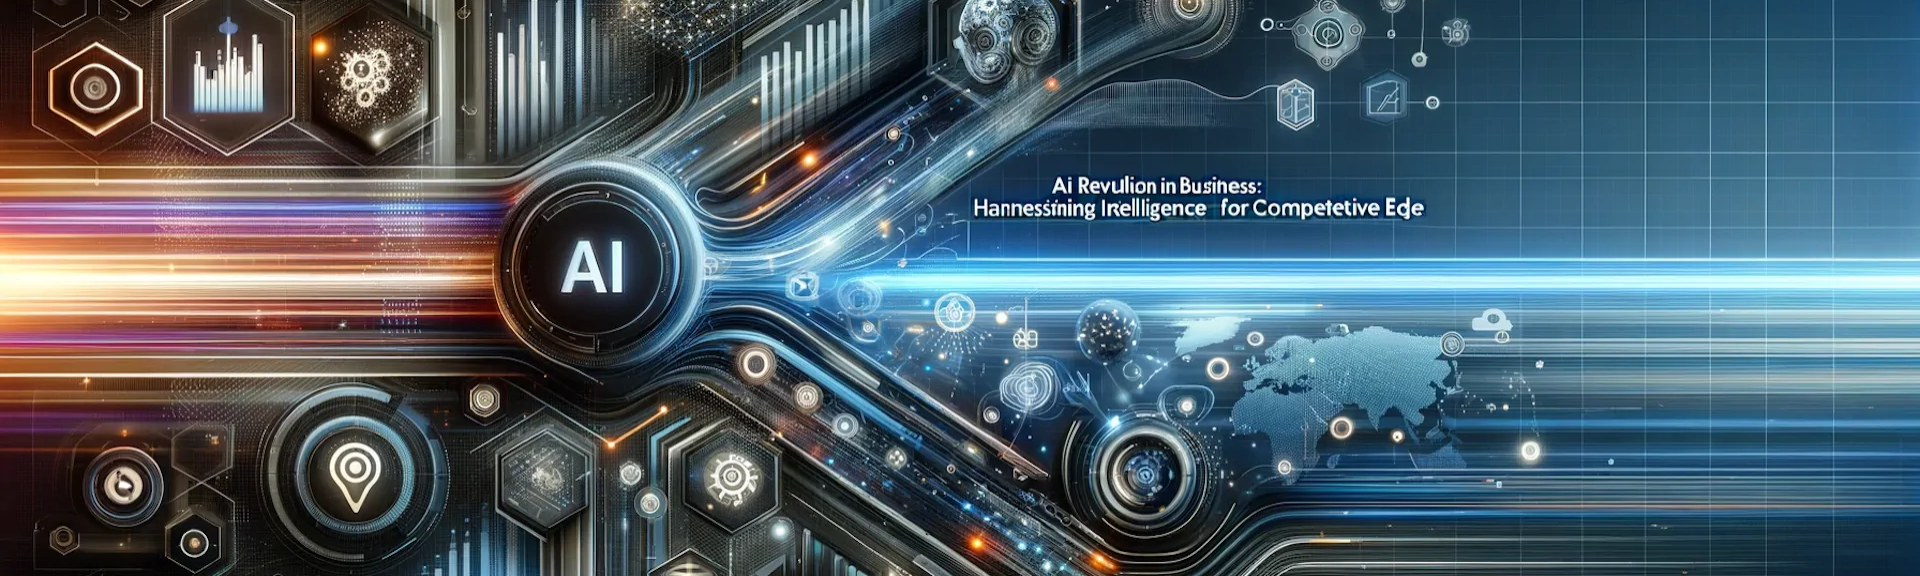 AI Revolution in Business Harnessing Intelligence for Competitive Edge